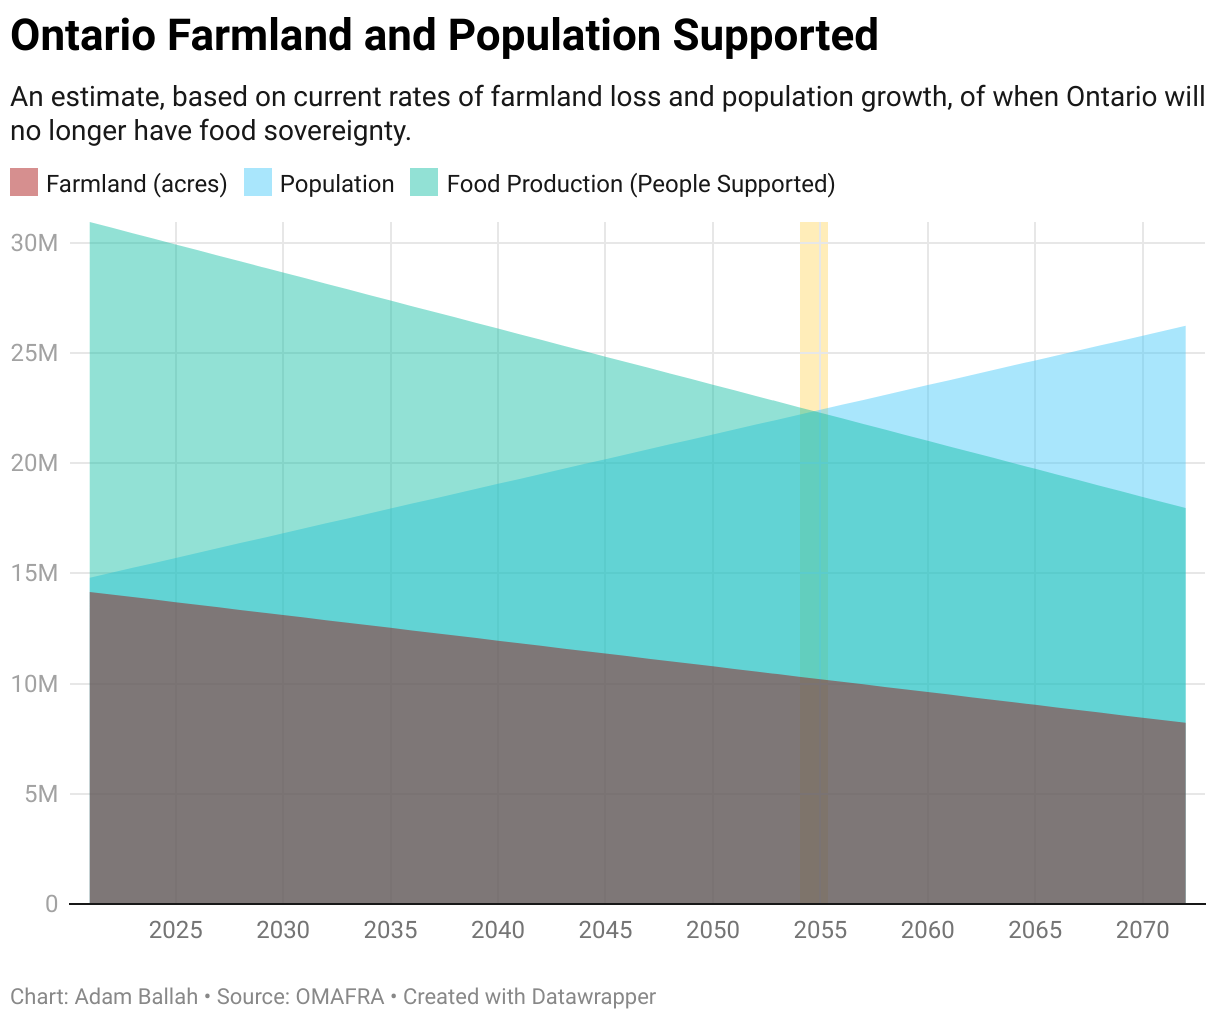 An estimate, based on current rates of farmland loss and population growth, of when Ontario will no longer have food sovereignty, which is roughly by the year 2055.